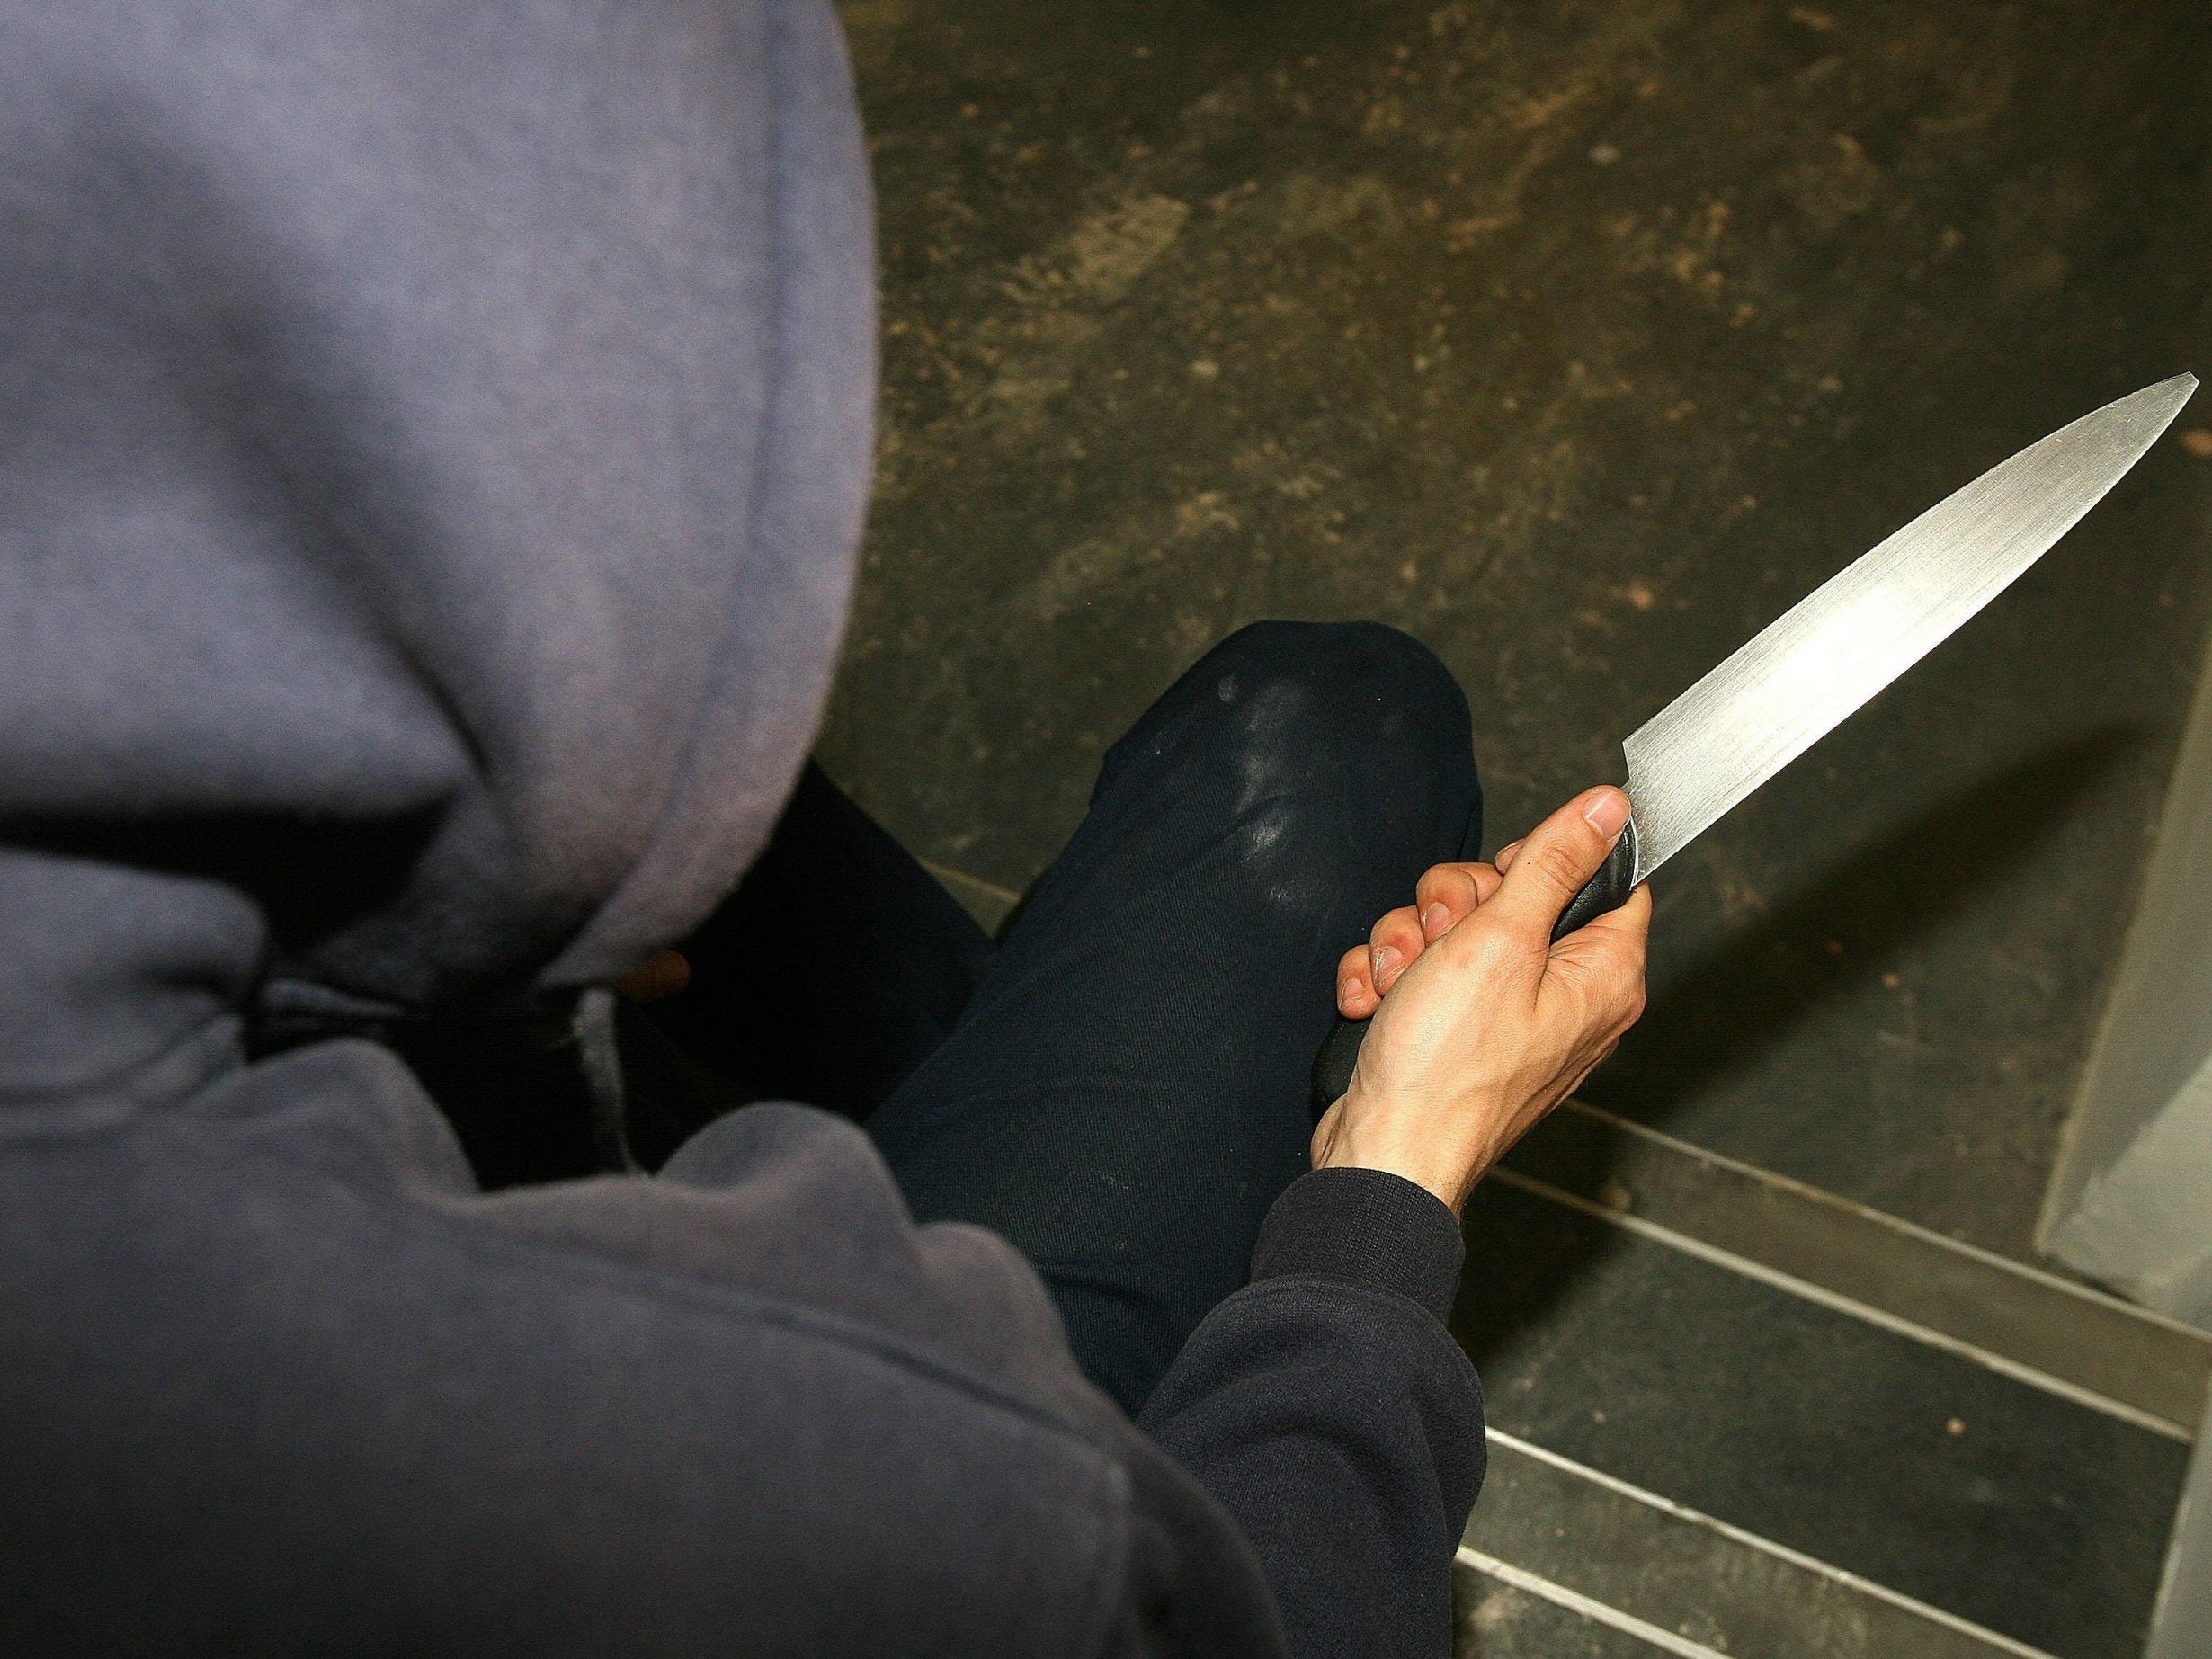 Home Secretary Sajid Javid has launched an eight-week consultation into a public health approach to tackling knife crime, which will will entail a multi-agency “public health duty'” intended to help spot the warning signs of young person's involvement